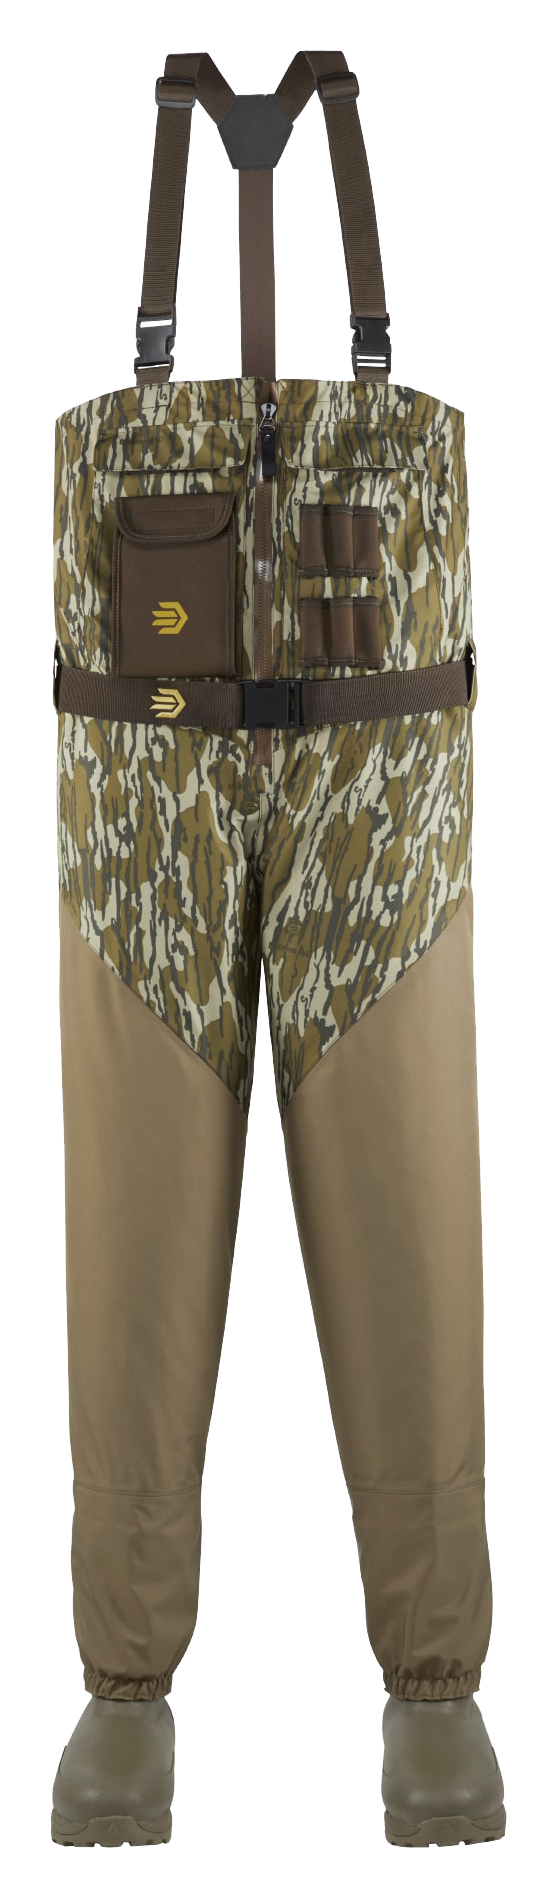 LaCrosse Alpha Agility Select Insulated Front-Zip Breathable Hunting Waders for Men - Mossy Oak Original Bottomland - 11/Stout